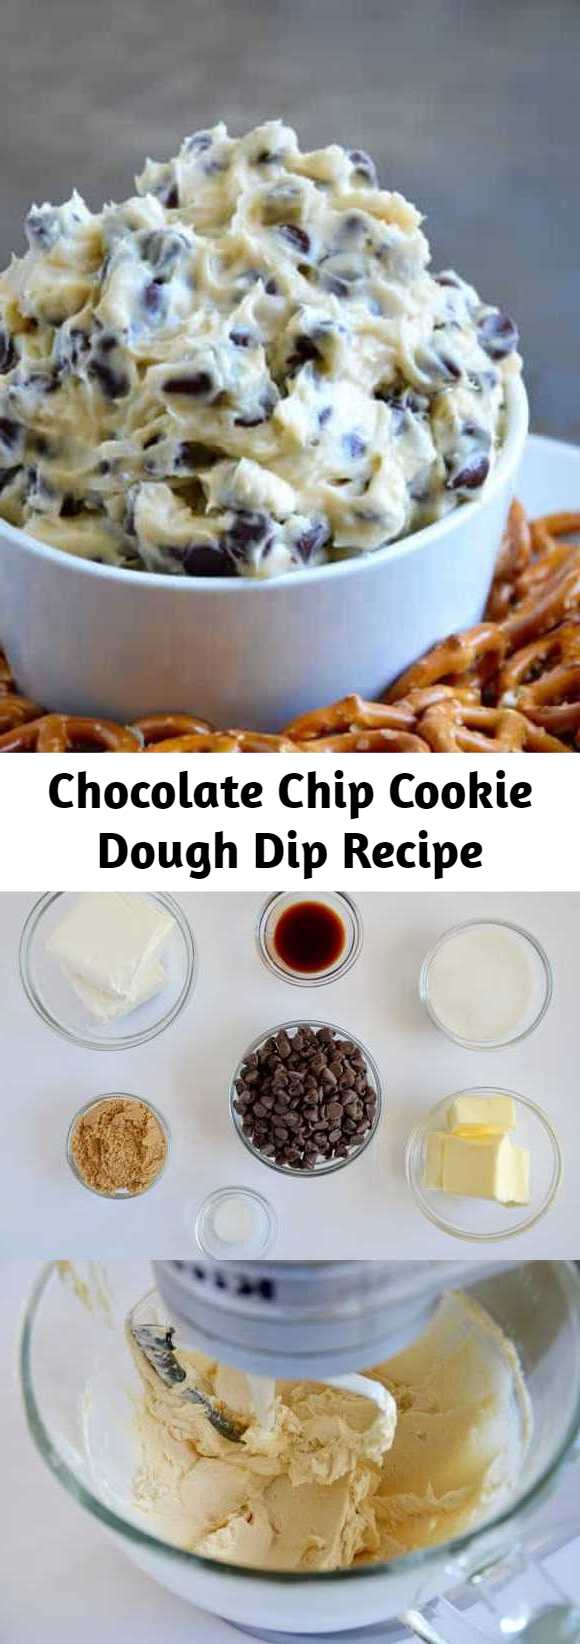 Chocolate Chip Cookie Dough Dip Recipe - Skip the eggs and ditch the oven with a quick and creamy recipe for no-bake Chocolate Chip Cookie Dough Dip!